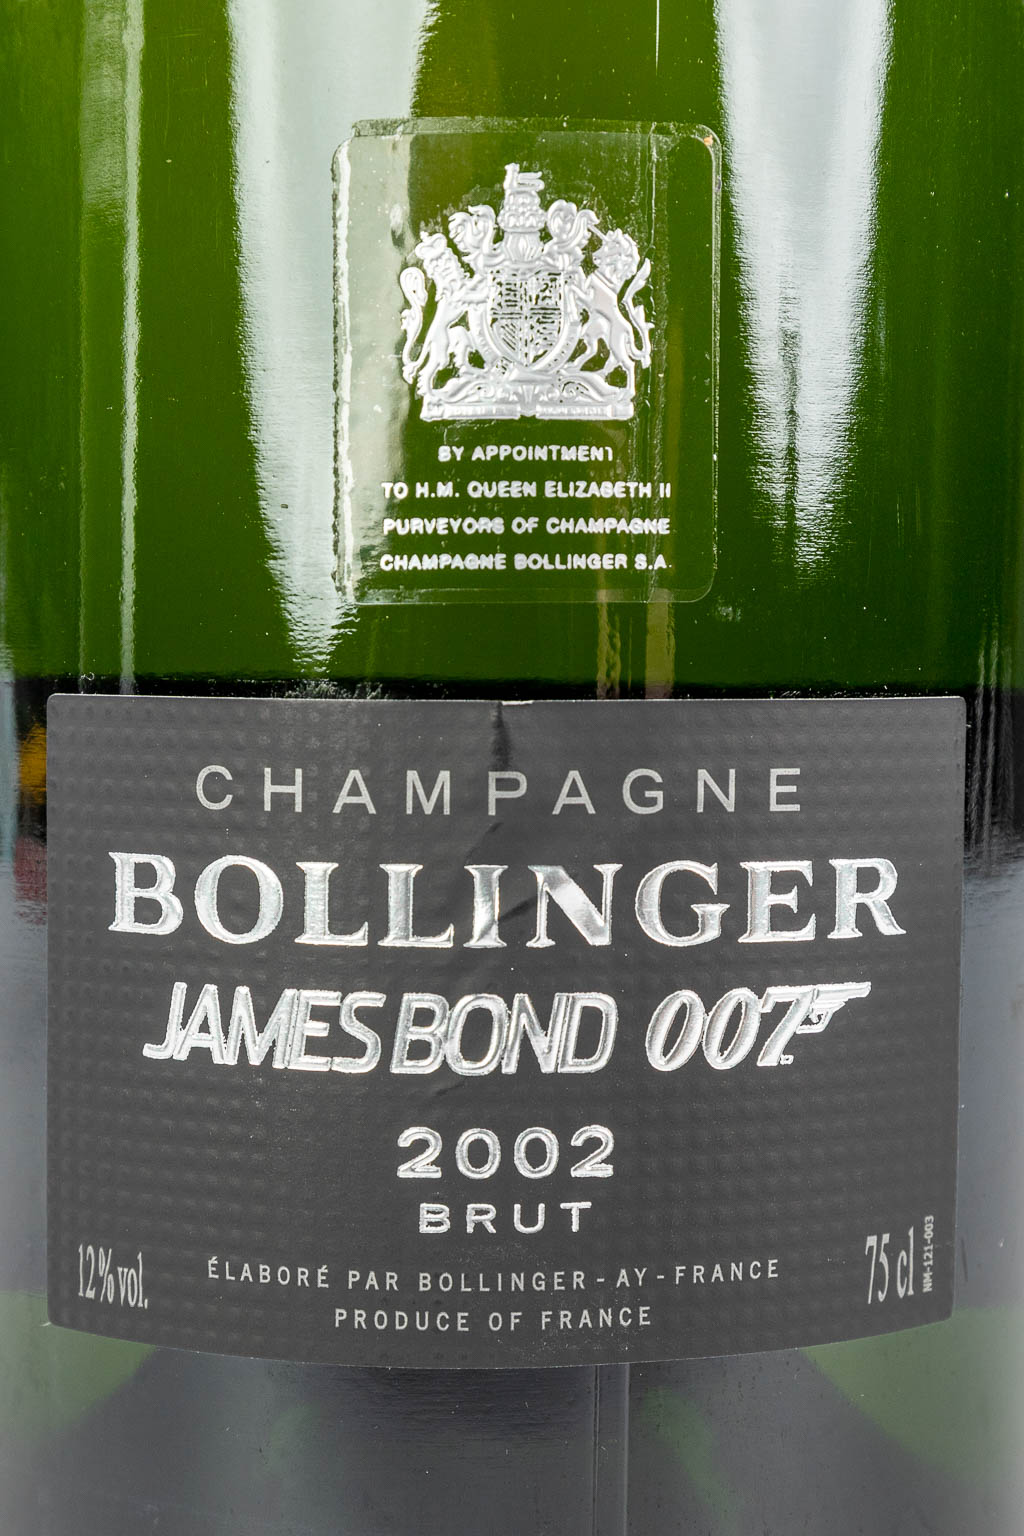 A bottle of Bollinger Champagne in a silencer container, special edition for James Bond, 2002. (H:33cm)